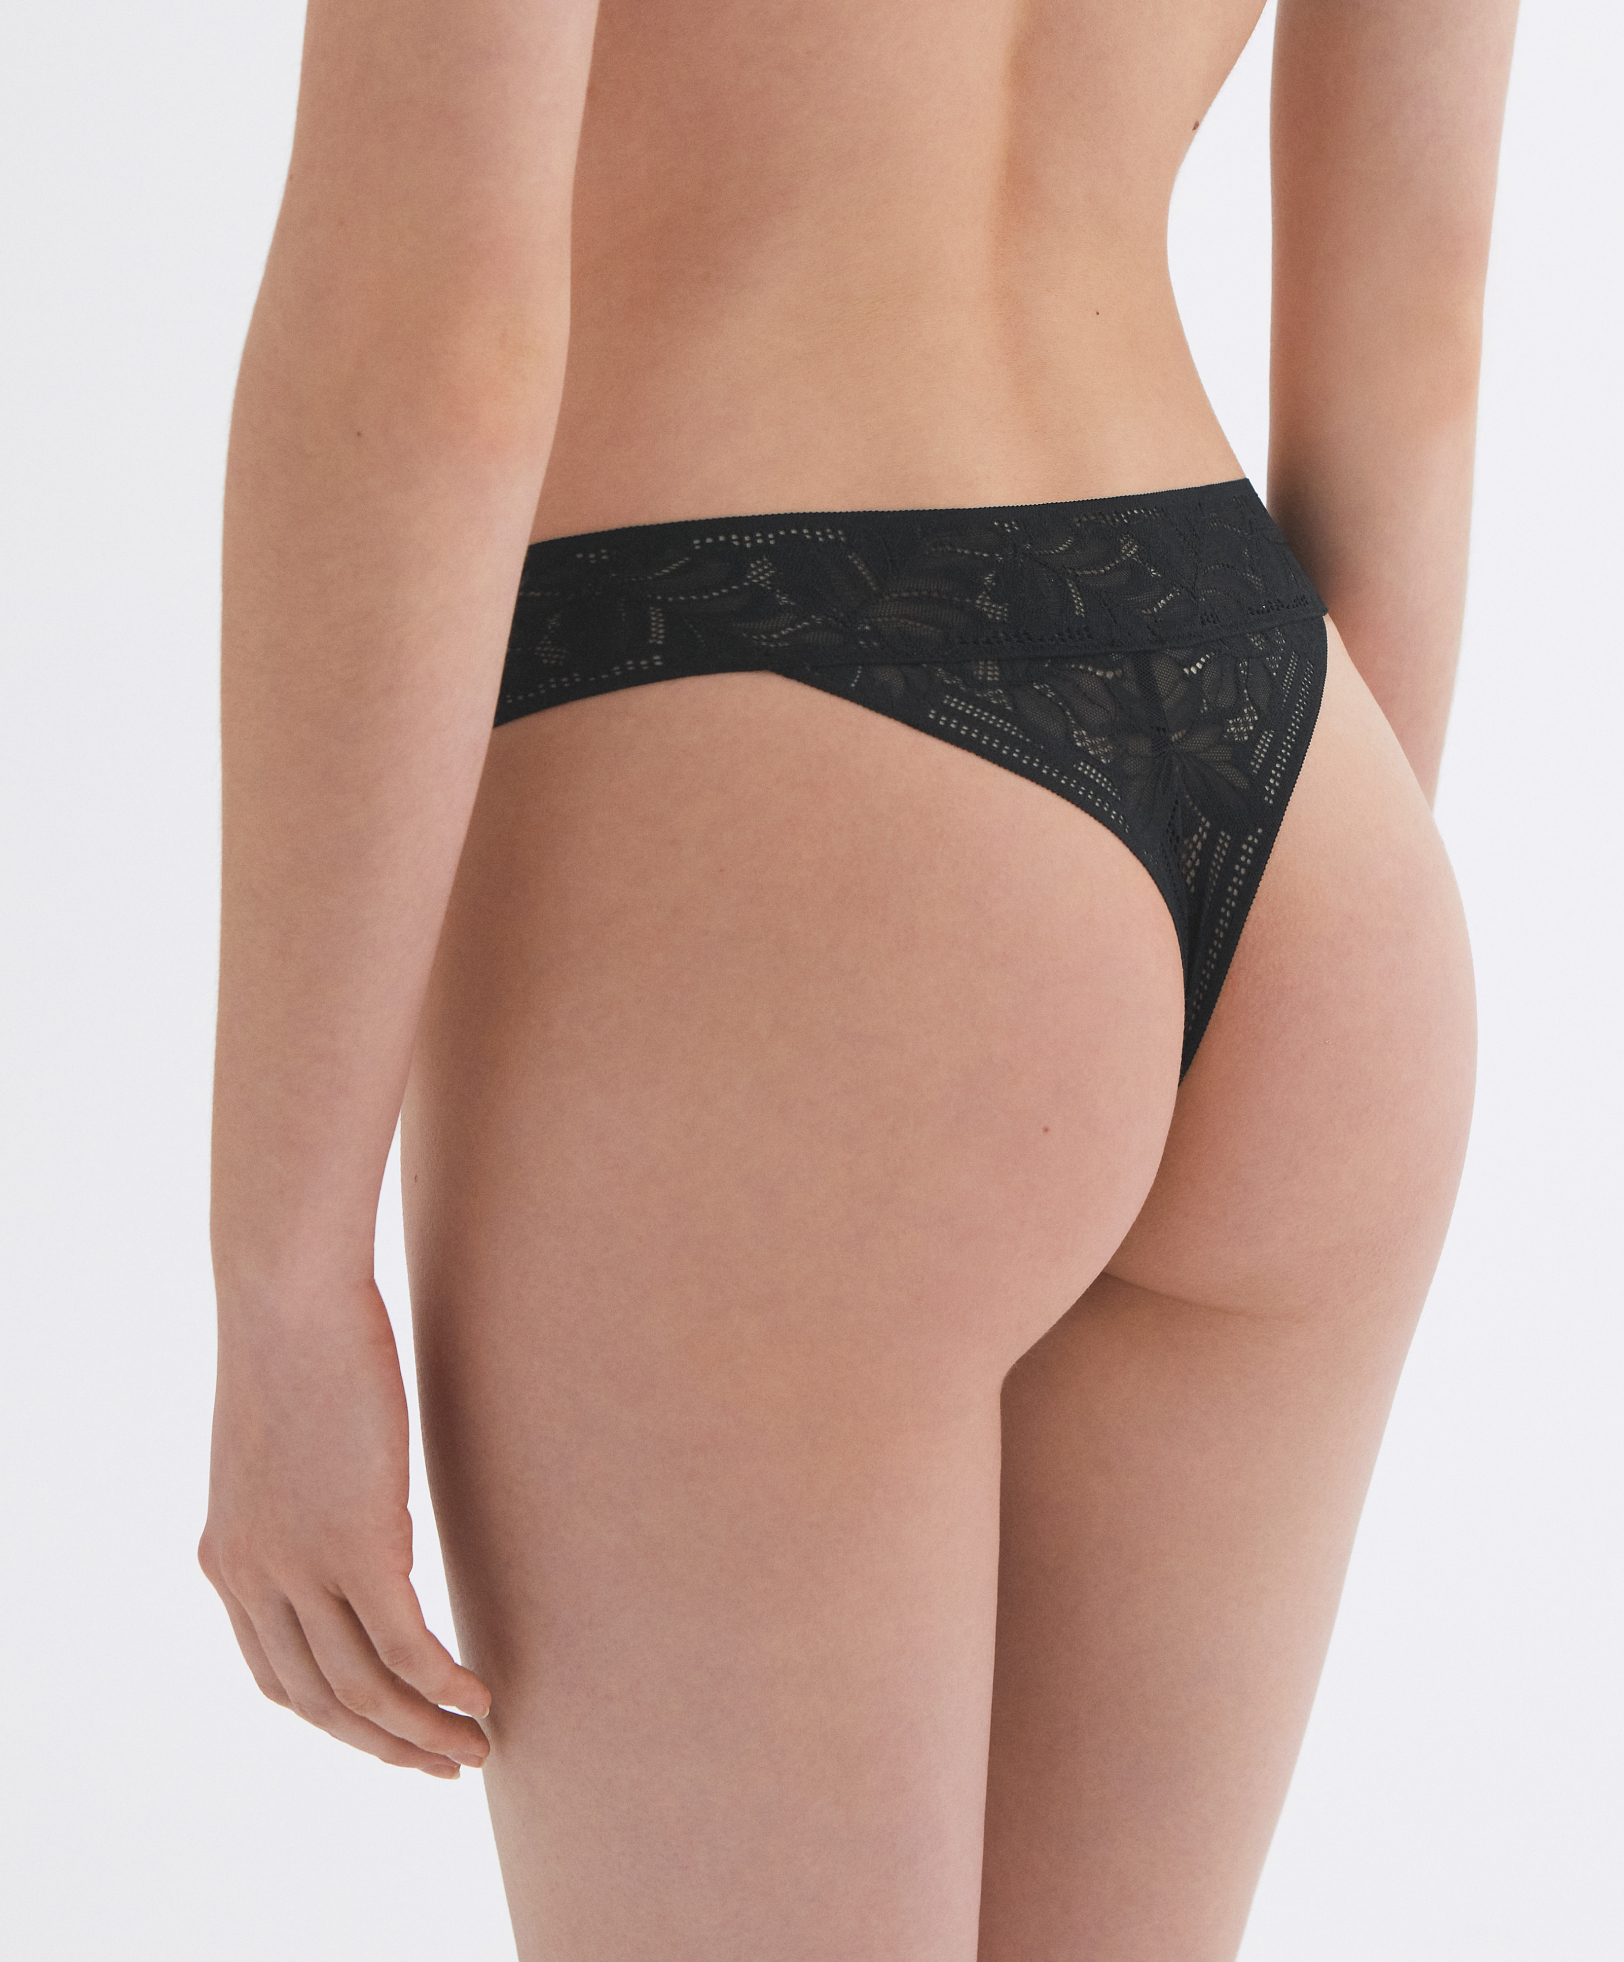 Tanga in V-Form aus Spitze